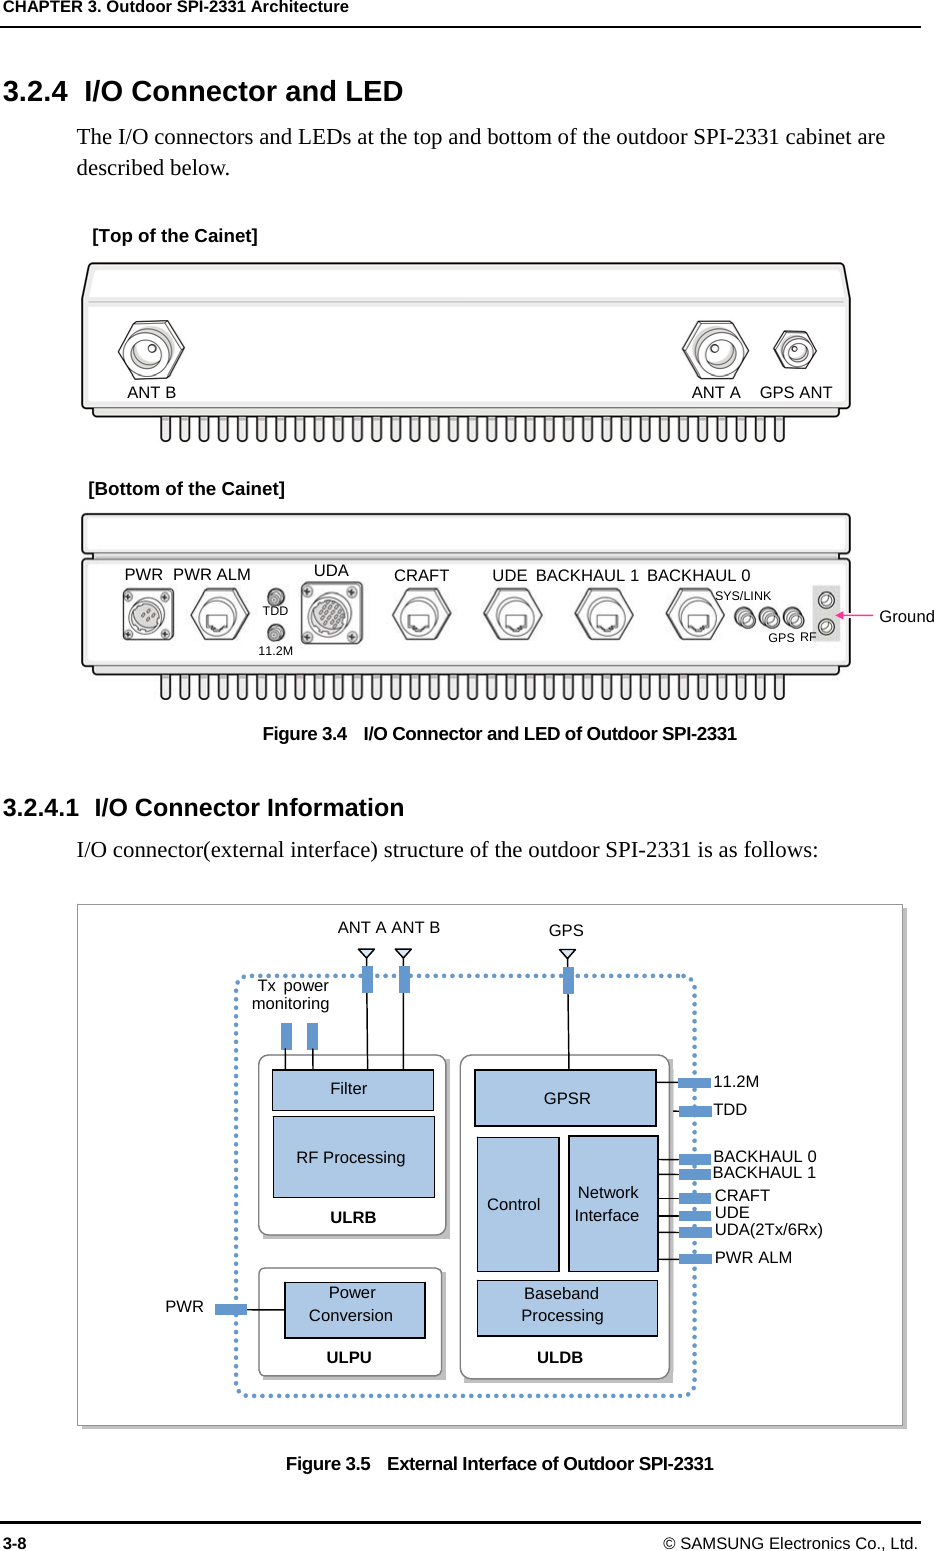 CHAPTER 3. Outdoor SPI-2331 Architecture 3-8 © SAMSUNG Electronics Co., Ltd. 3.2.4 I/O Connector and LED The I/O connectors and LEDs at the top and bottom of the outdoor SPI-2331 cabinet are described below.    Figure 3.4    I/O Connector and LED of Outdoor SPI-2331  3.2.4.1  I/O Connector Information I/O connector(external interface) structure of the outdoor SPI-2331 is as follows:  Figure 3.5    External Interface of Outdoor SPI-2331   RF ProcessingControlBasebandProcessingNetworkInterfaceULDB ULRB GPSRBACKHAUL 0 CRAFT ANT A ANT B ULPU FilterTx power monitoring GPS 11.2M TDD UDE UDA(2Tx/6Rx) PWR ALM Power ConversionPWR BACKHAUL 1 GPS ANT   ANT B  ANT A PWR  PWR ALM    UDA  CRAFT  UDE BACKHAUL 1 Ground 11.2M TDD SYS/LINK GPS RF BACKHAUL 0 [Top of the Cainet] [Bottom of the Cainet] 